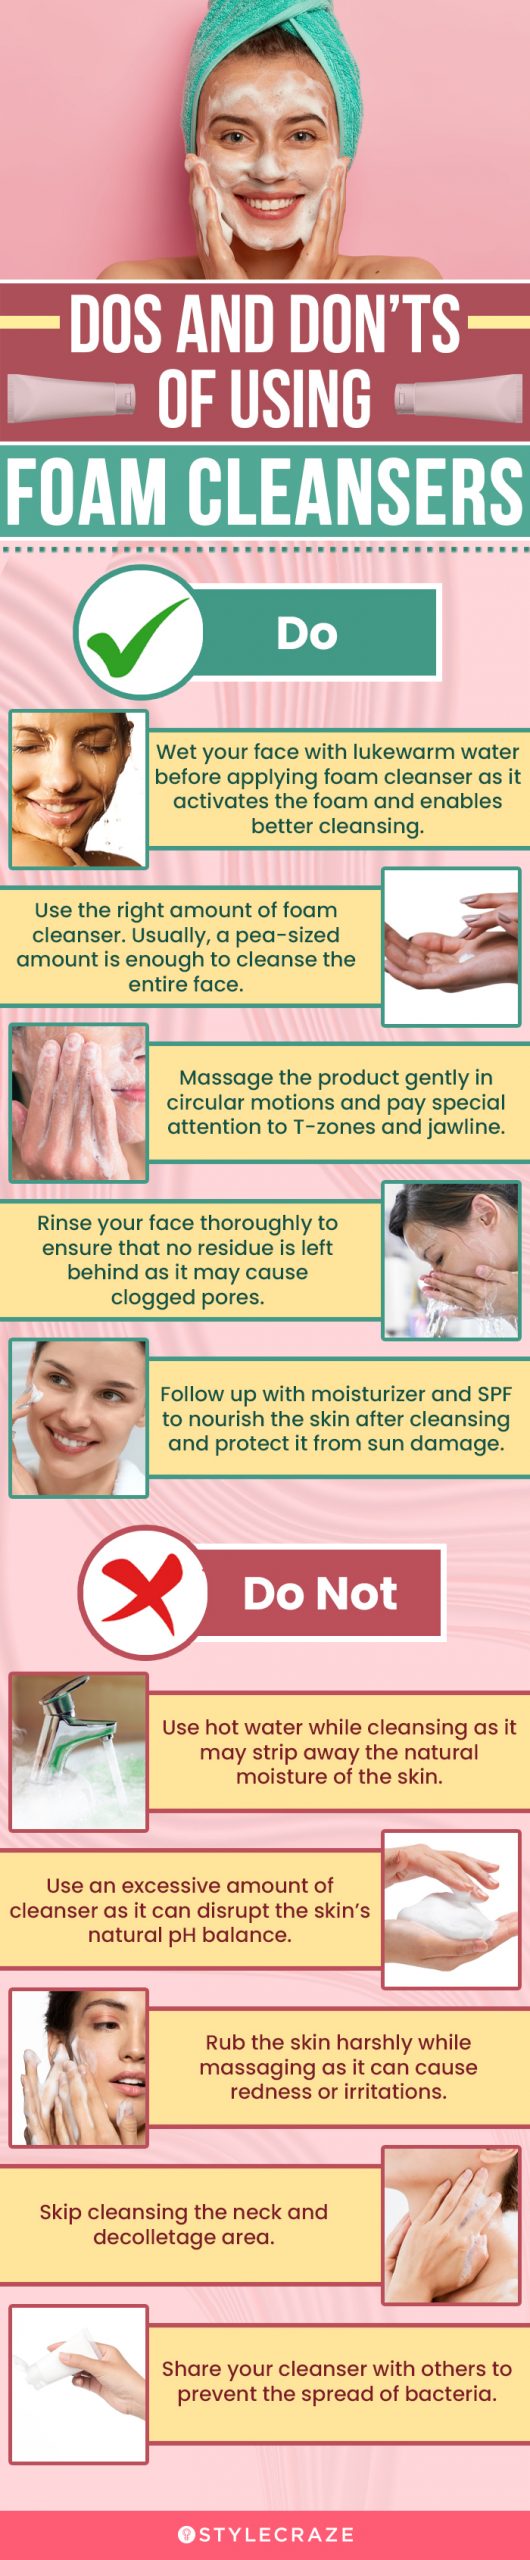 Dos And Don’ts Of Using Foam Cleansers (infographic)